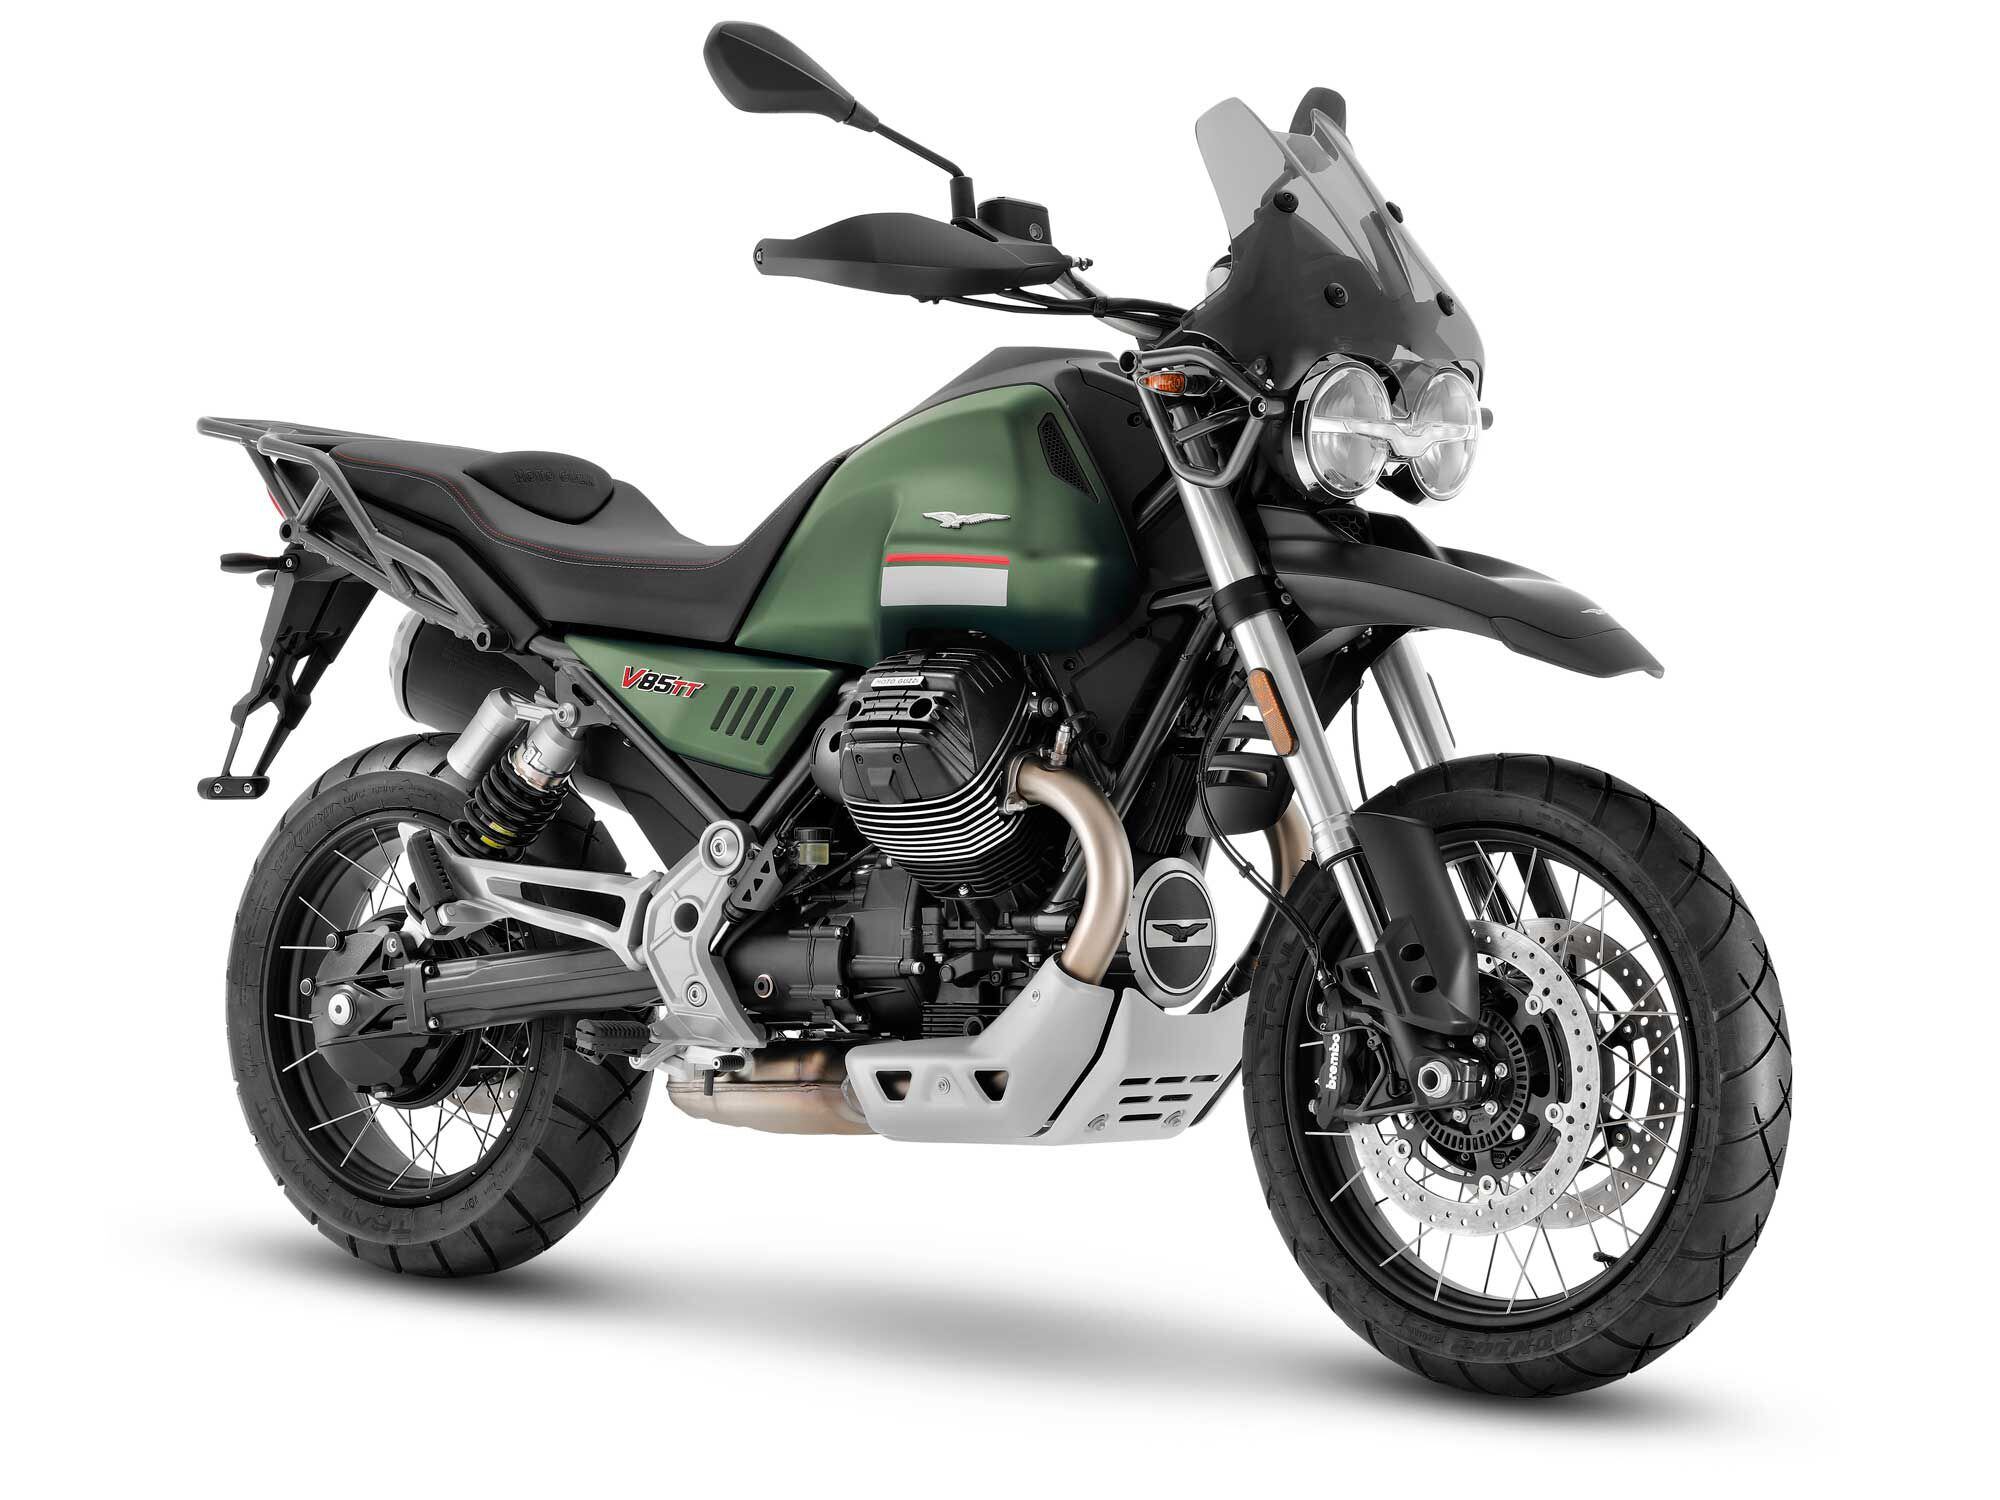 The base-model 2022 Moto Guzzi V85 TT comes equipped with a shorter windshield and no crashbars or centerstand.